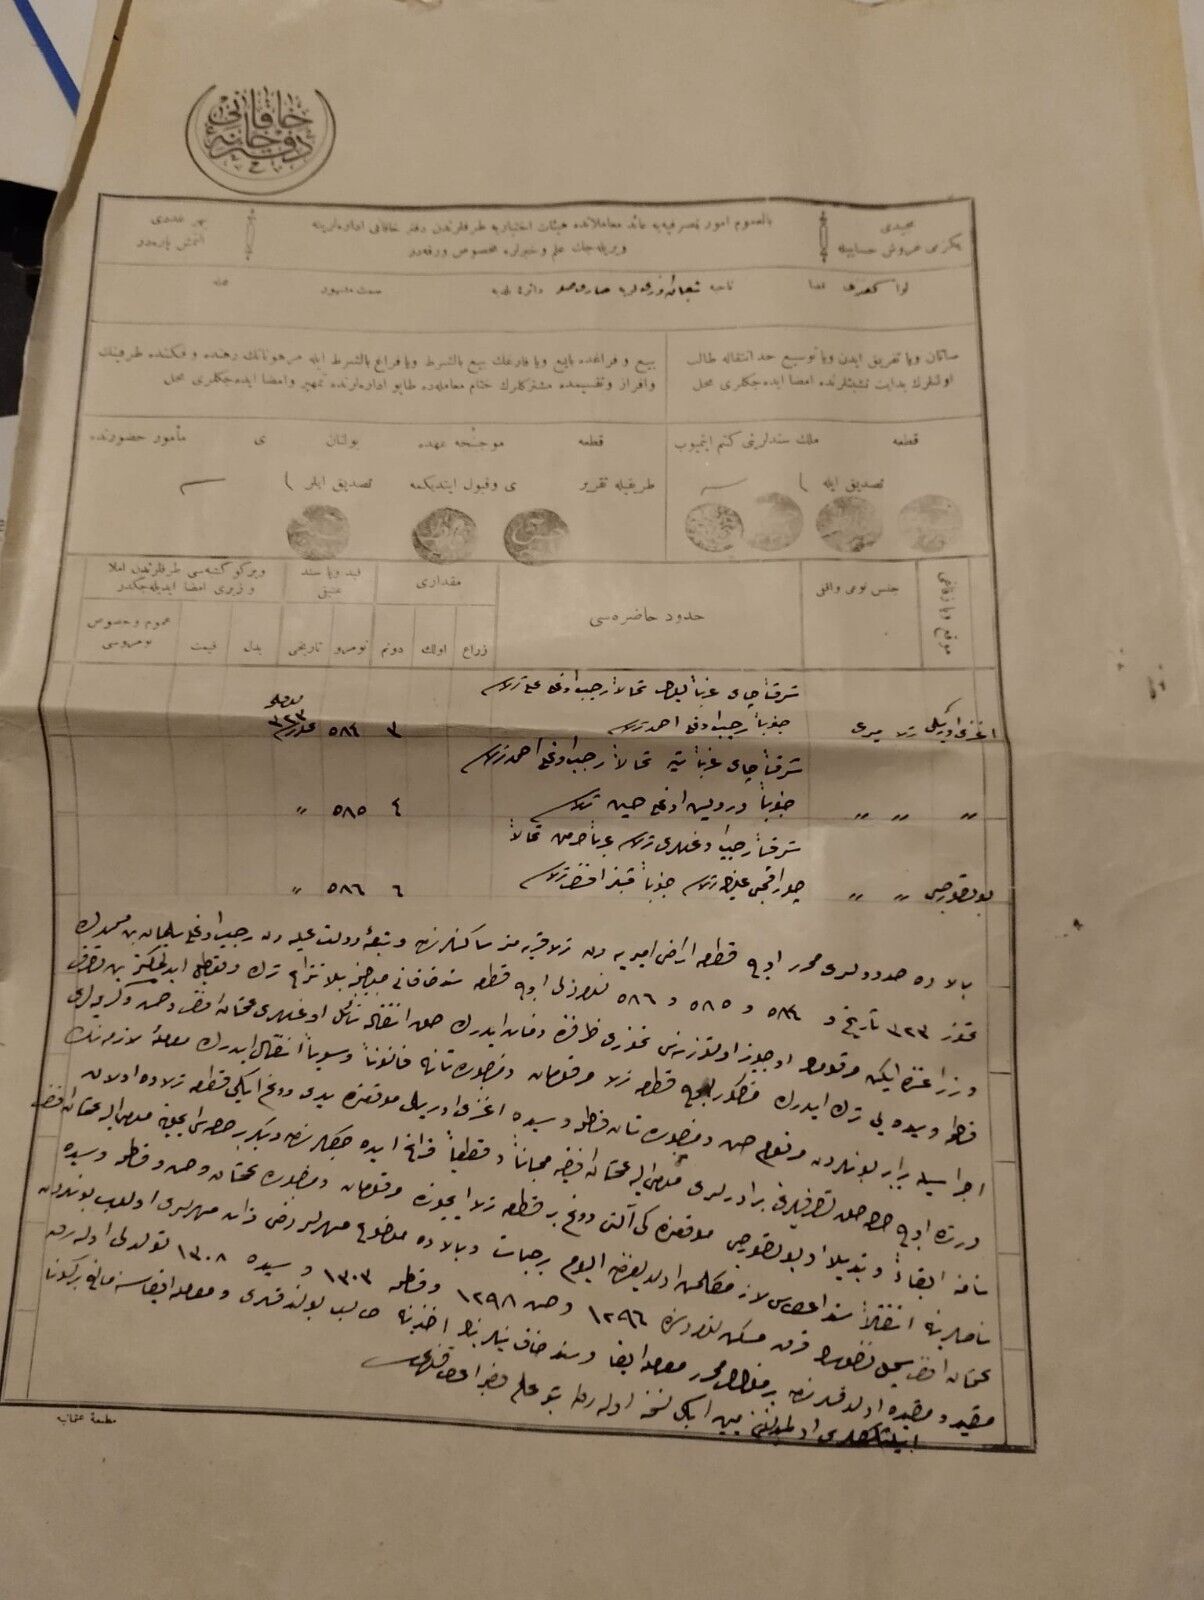 OTTOMAN PERIOD DOCUMENT ABOUT REAL ESTATE - 1323 OTTOMAN CALENDER